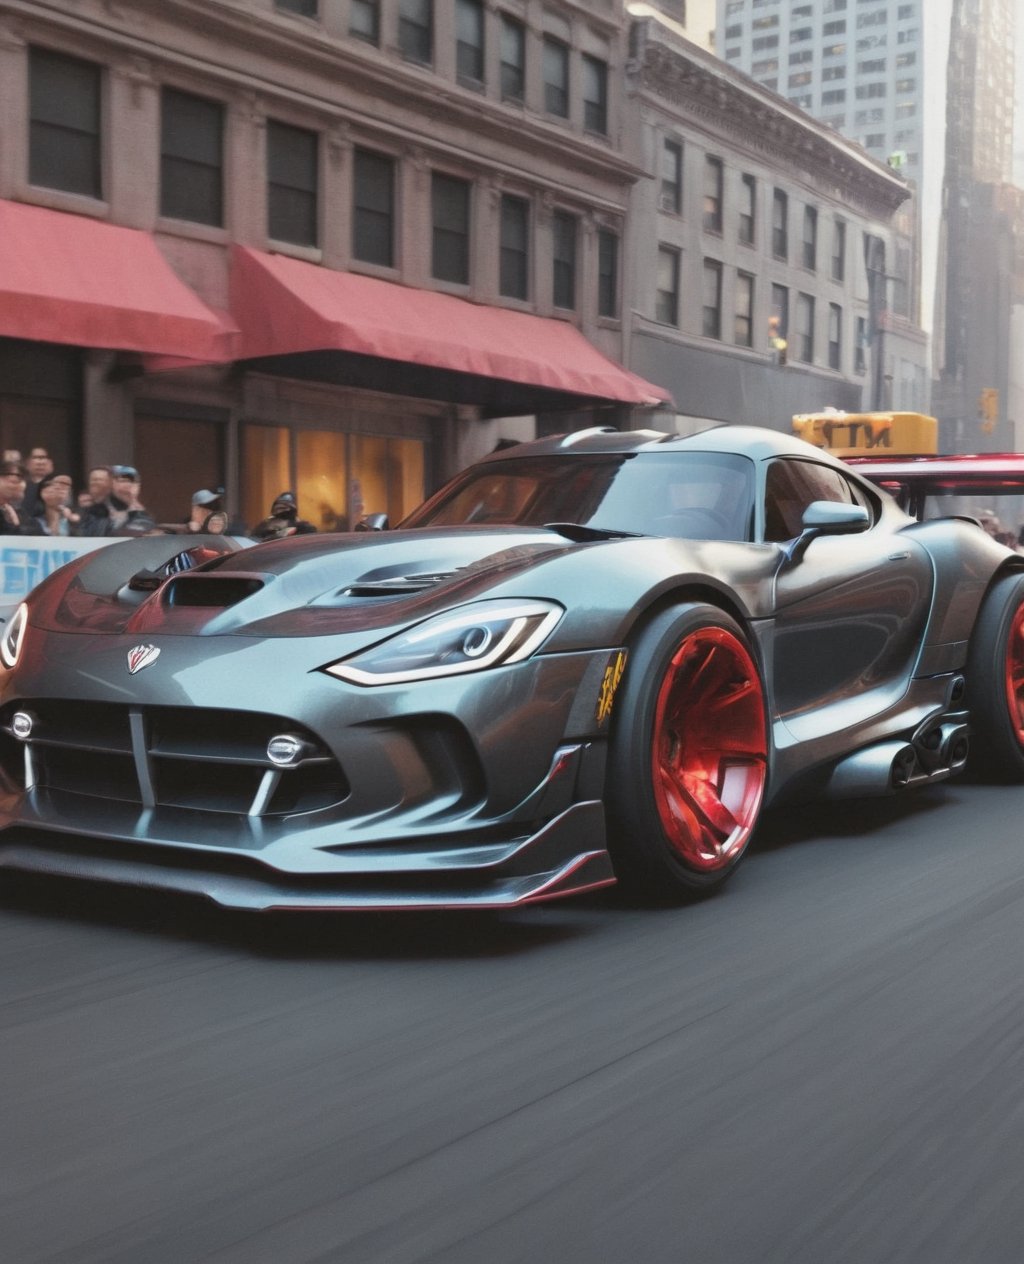 Shelby viper(truck,GtsE-,DTM Ecosport) ,concept car, fancy cyborg design, futuristic, cyborg style,cyberpunk style, surrounded by people , Drifting New York City, Black color, glossy, Light red color wheels,detailmaster2, high details, front perspective wita tree in a corner view,cyberpunk,pturbo,8K,very high detailed, photorealistic,H effect,Movie Still,Landskaper, add_more_creative